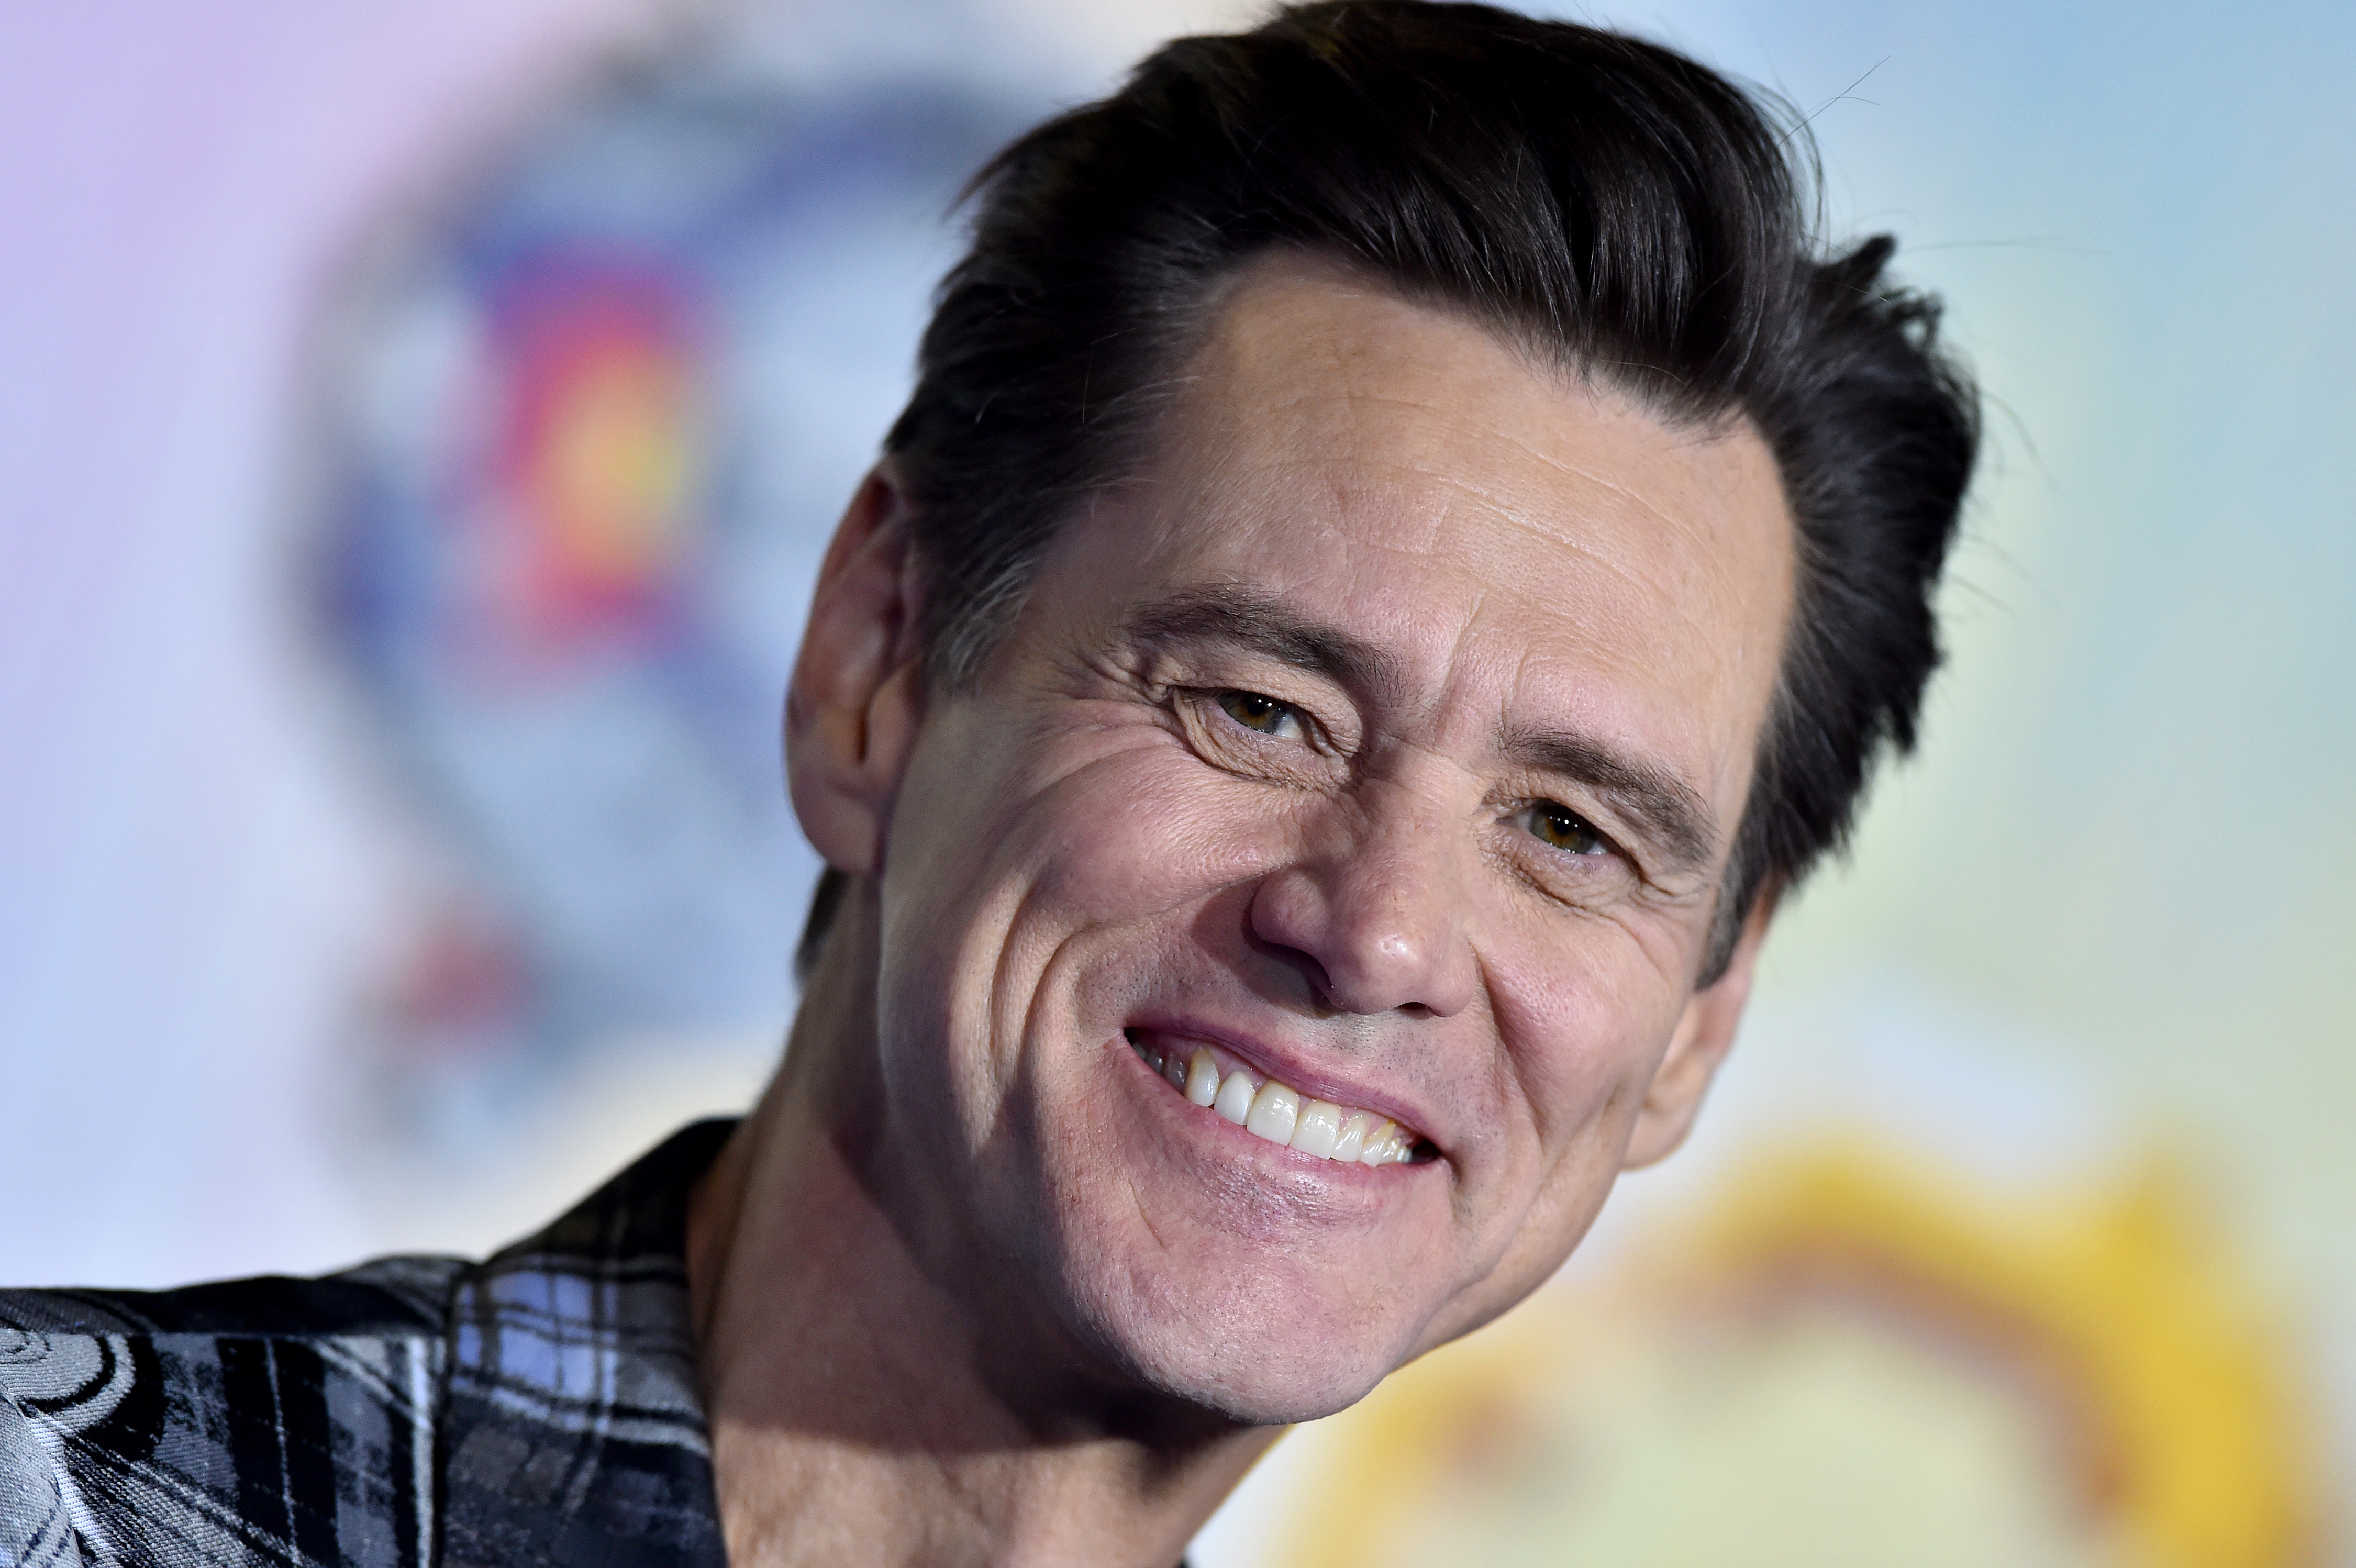 Jim Carrey, who could be retiring from movies, attends an LA screening of Sonic the Hedgehog.